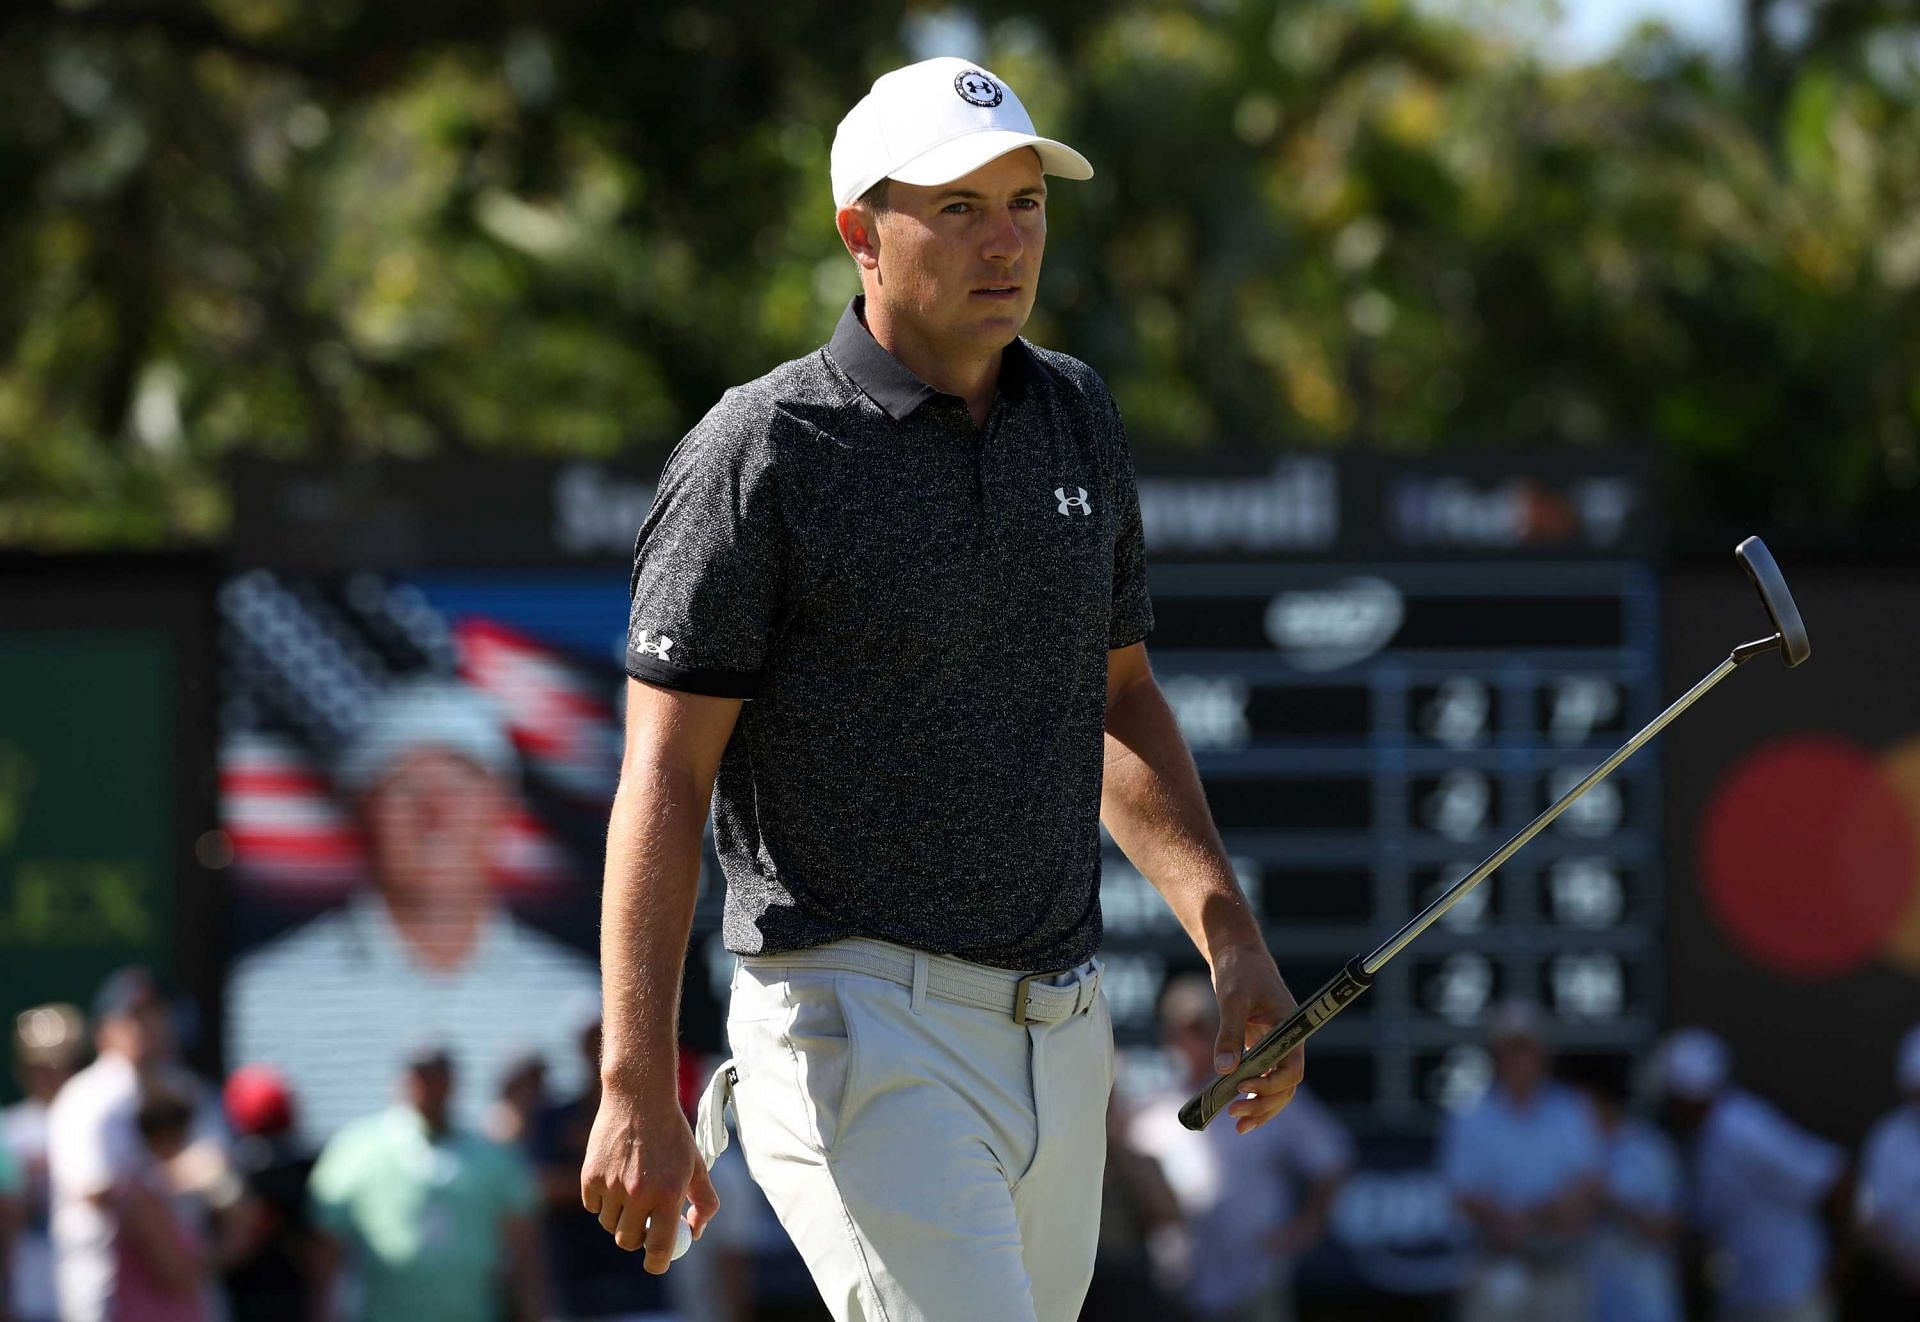 Spieth was leading after day 1, he failed to make a cut after Round 2